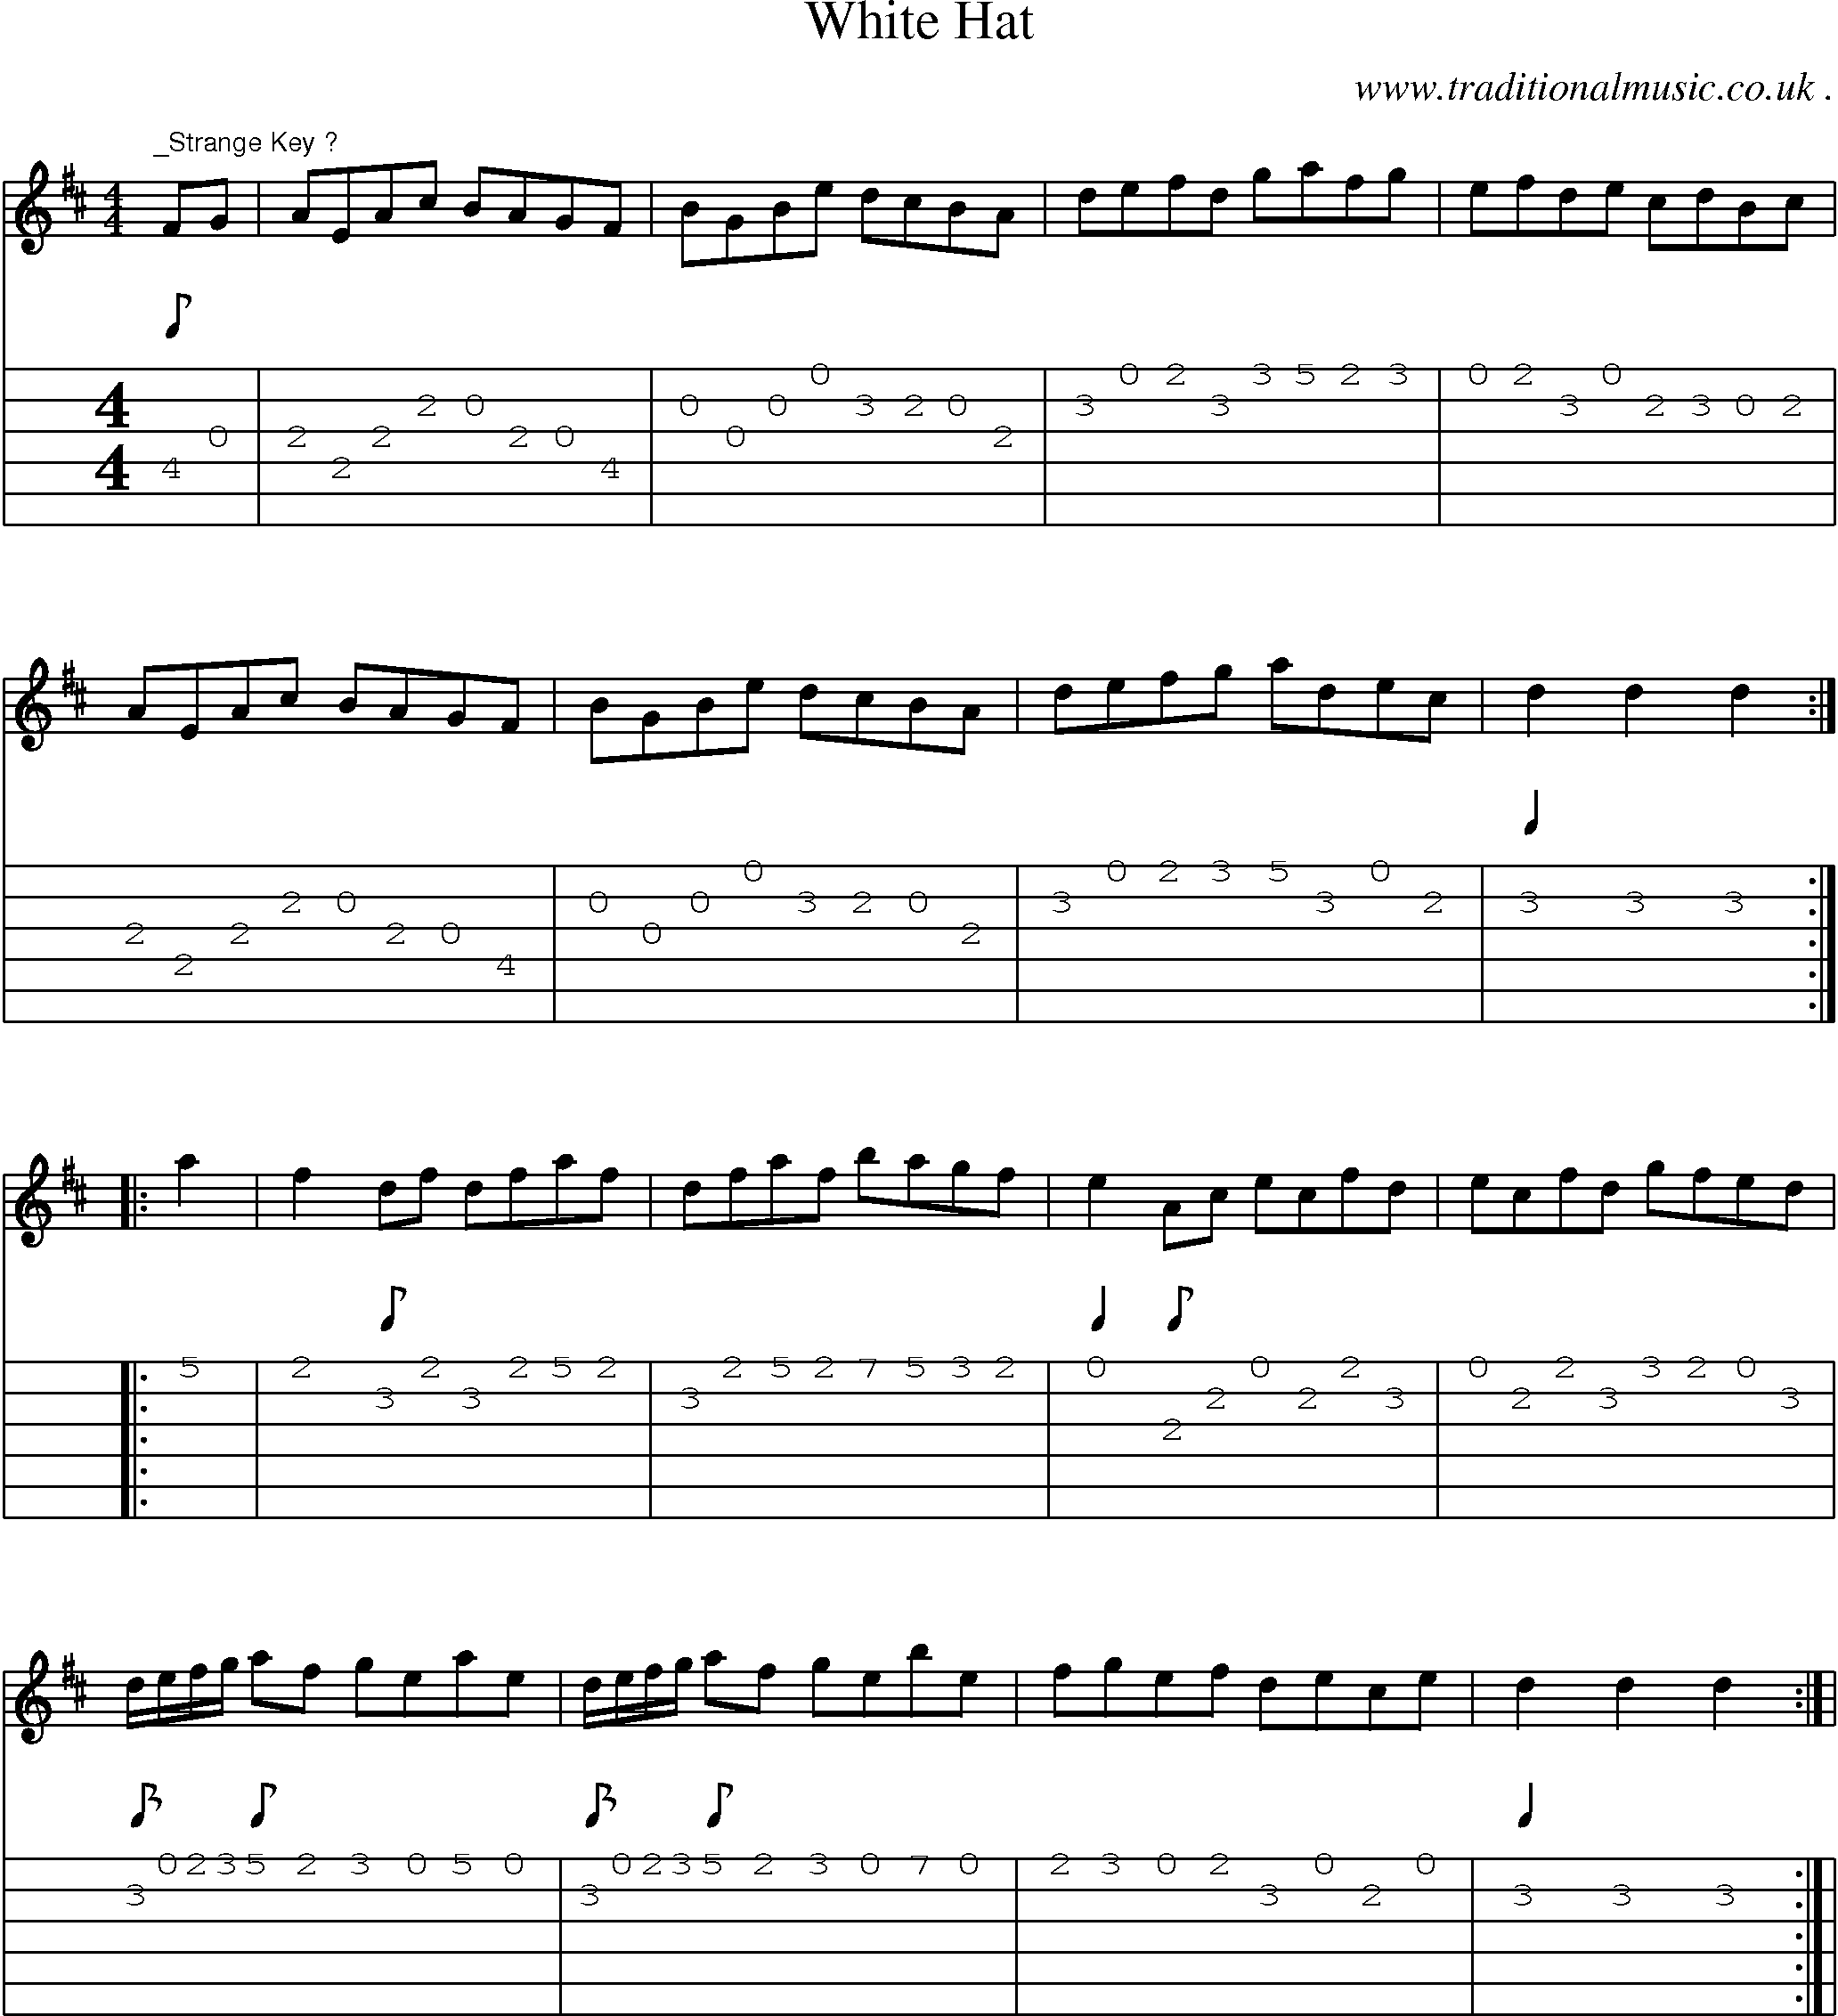 Sheet-Music and Guitar Tabs for White Hat